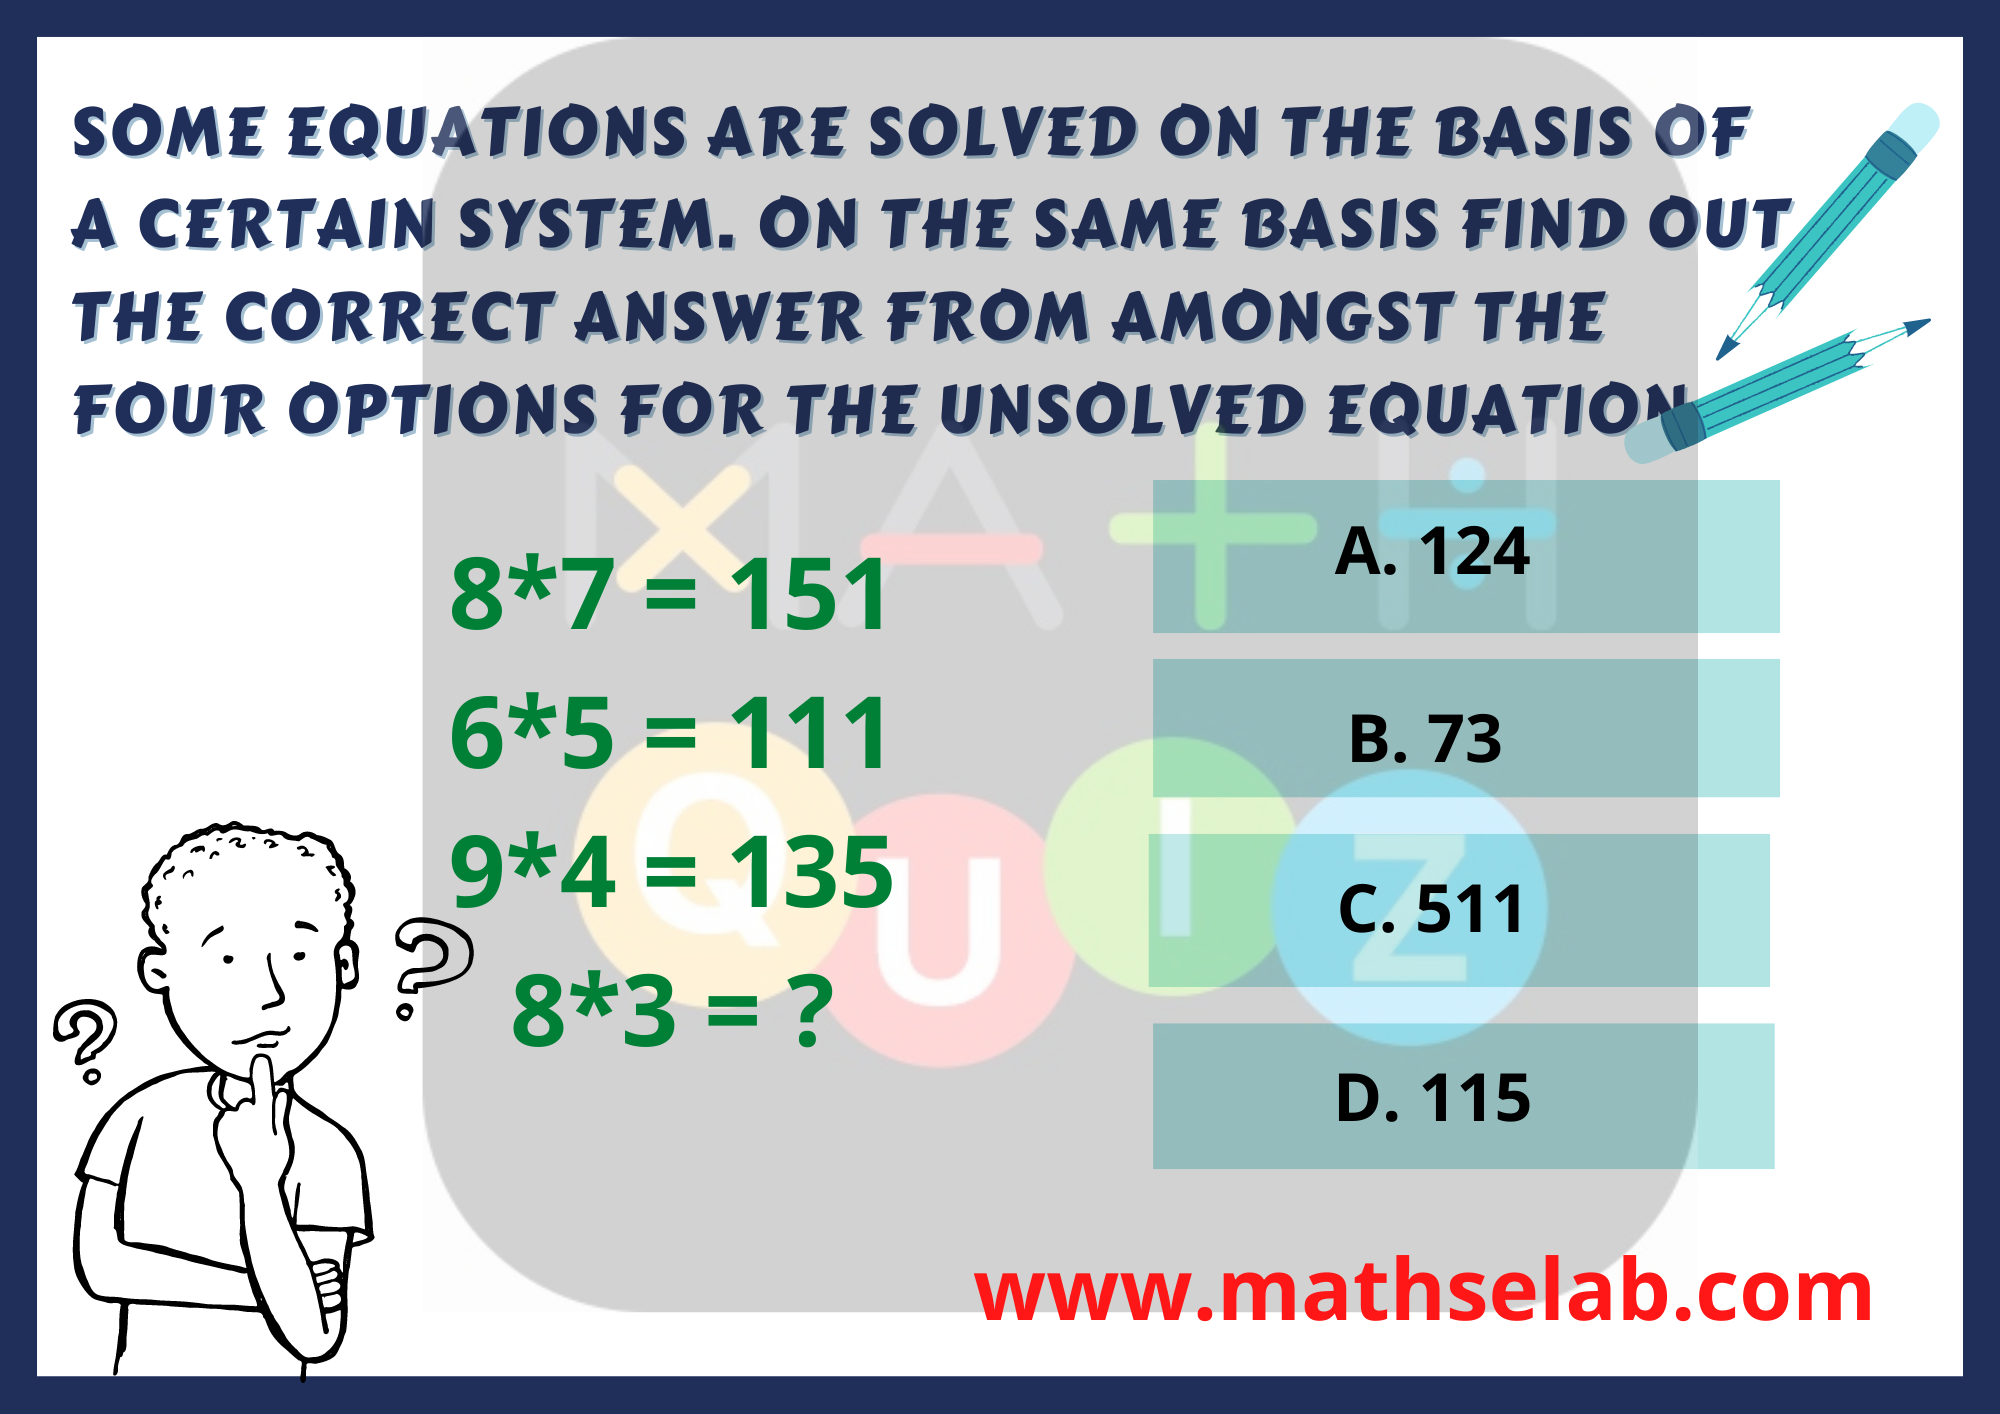 Some equations are solved on the basis of a certain system. On the same basis find out the correct answer from amongst the four options for the unsolved equation.8*7 = 151 6*5 = 111 9*4 = 135 8*3 = ?...www.mathselab.com